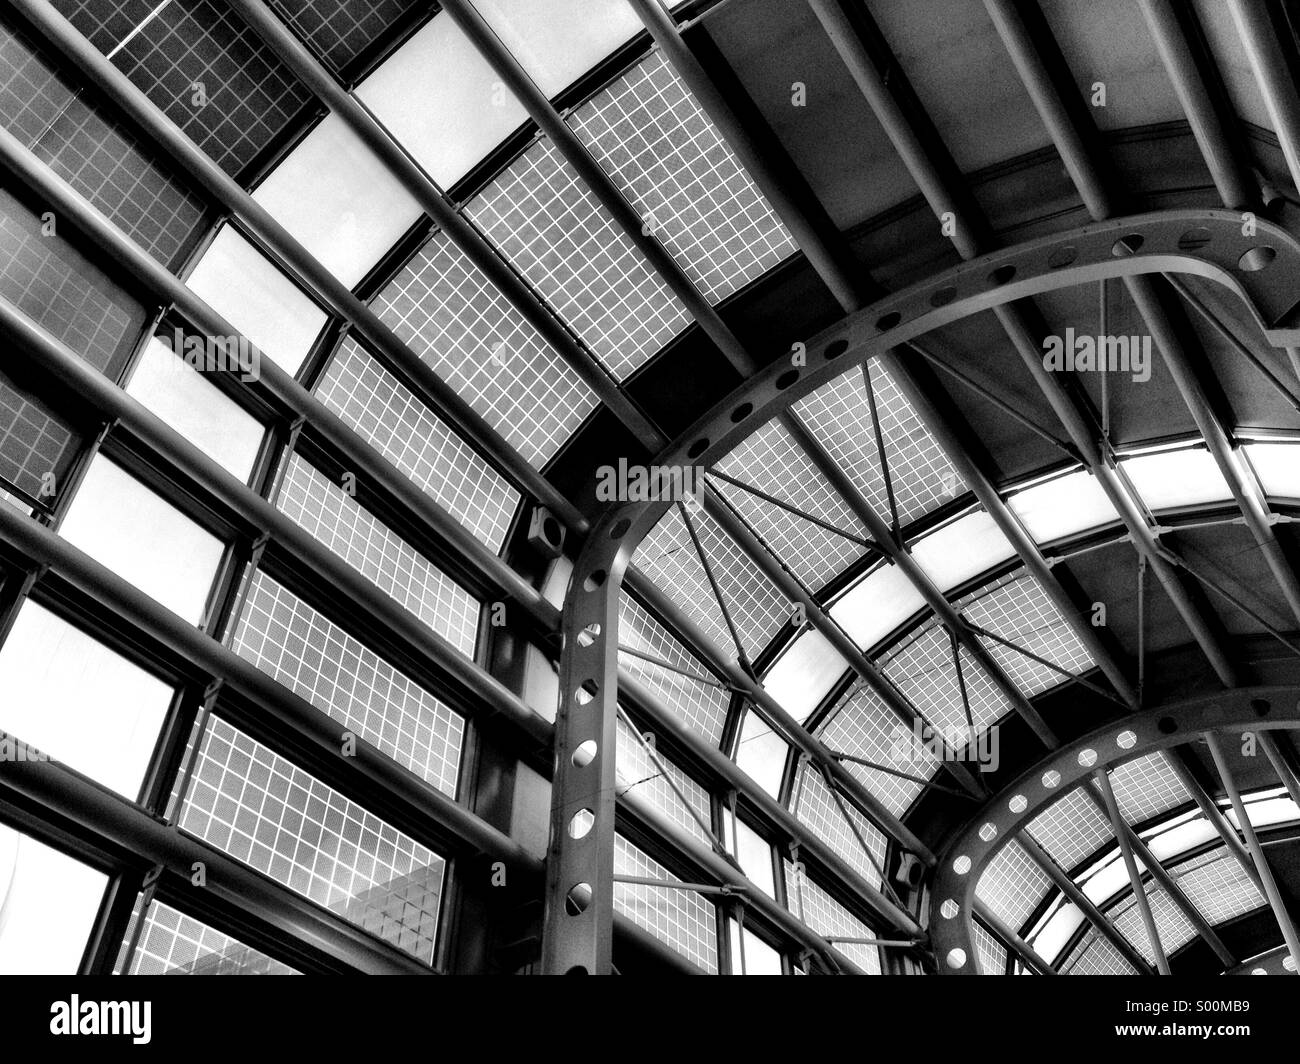 The ceiling of O'Hare Airport in Chicago, Illinois. Stock Photo